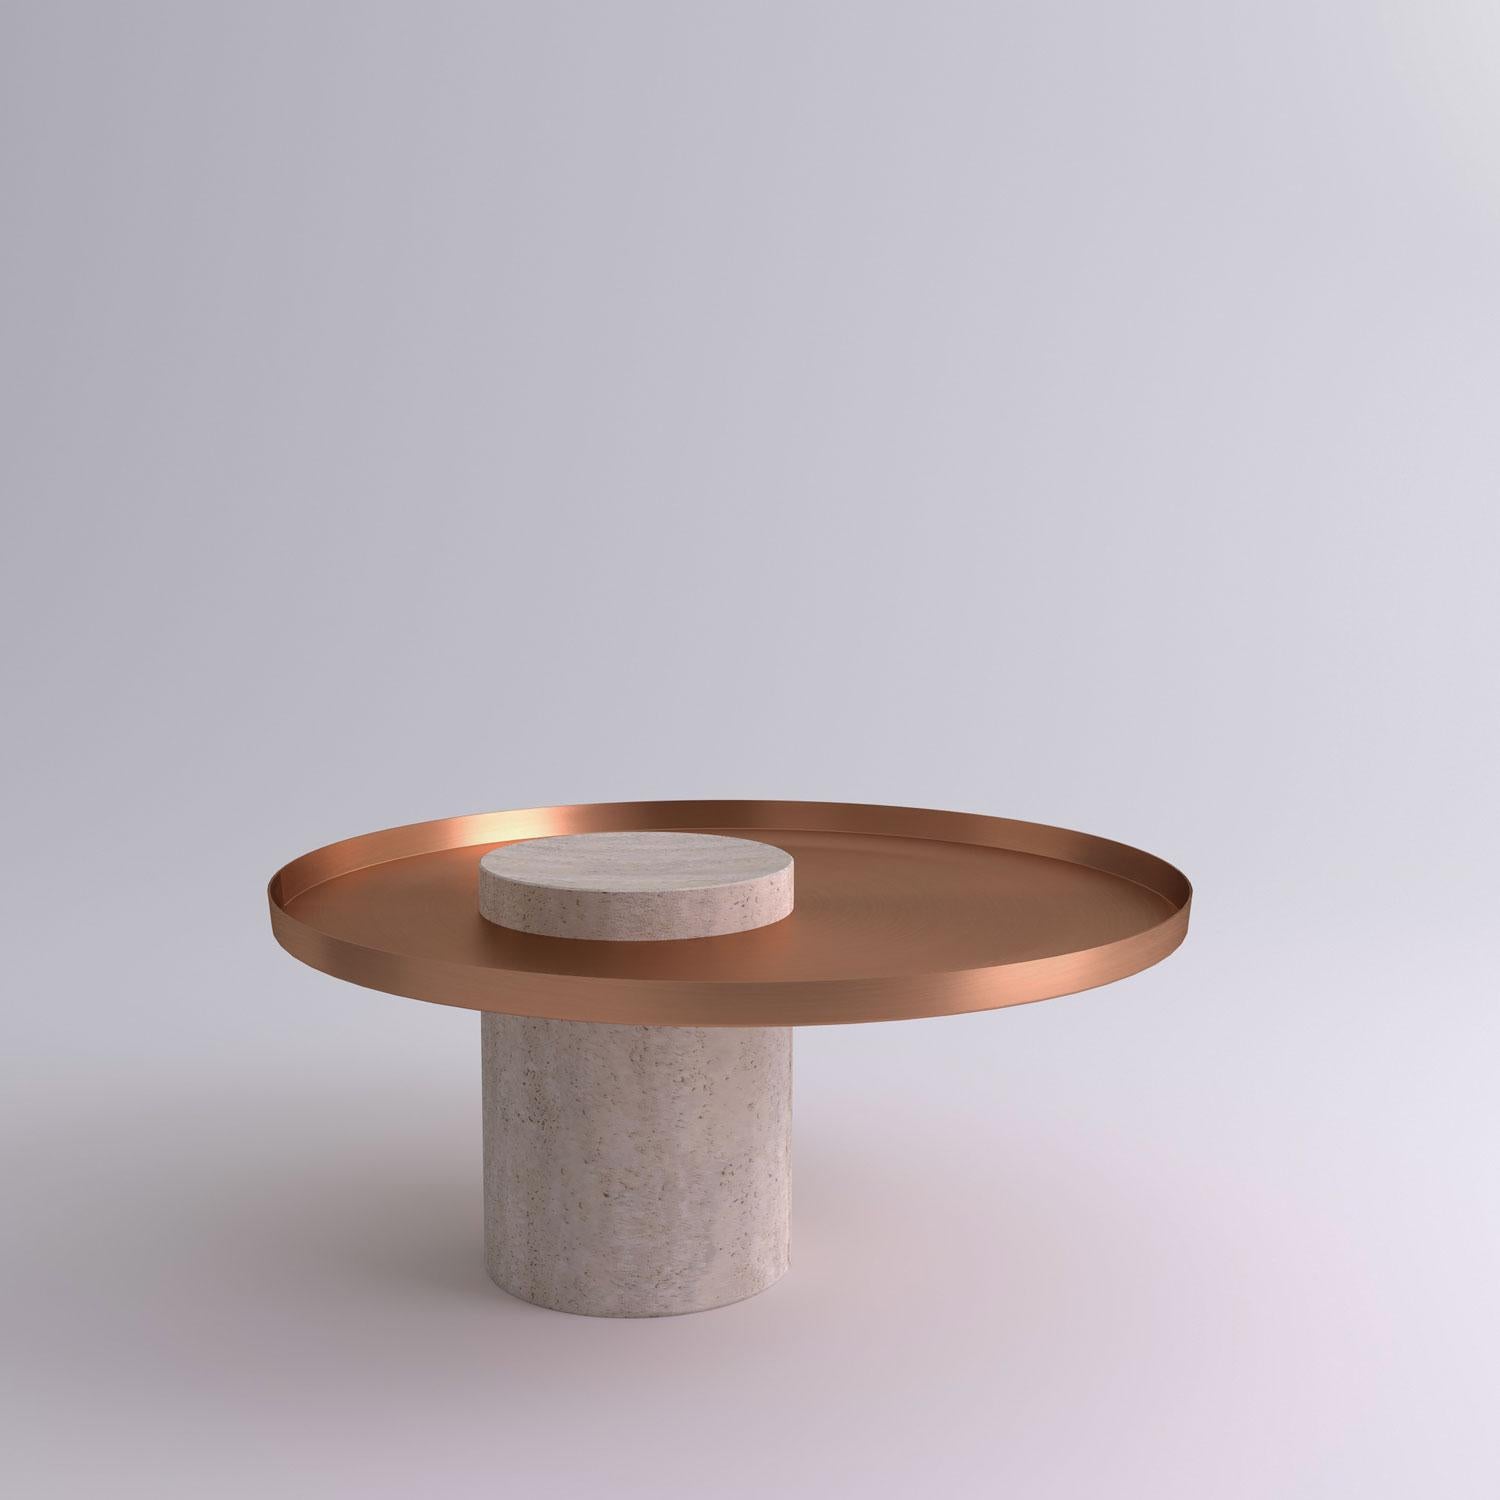 Low travertine contemporary guéridon, Sebastian Herkner
Dimensions: D 70 x H 33 cm
Materials: Travertine stone, copper

The salute table exists in 3 sizes, 4 different marble stones for the column and 5 different finishes for the tray for a